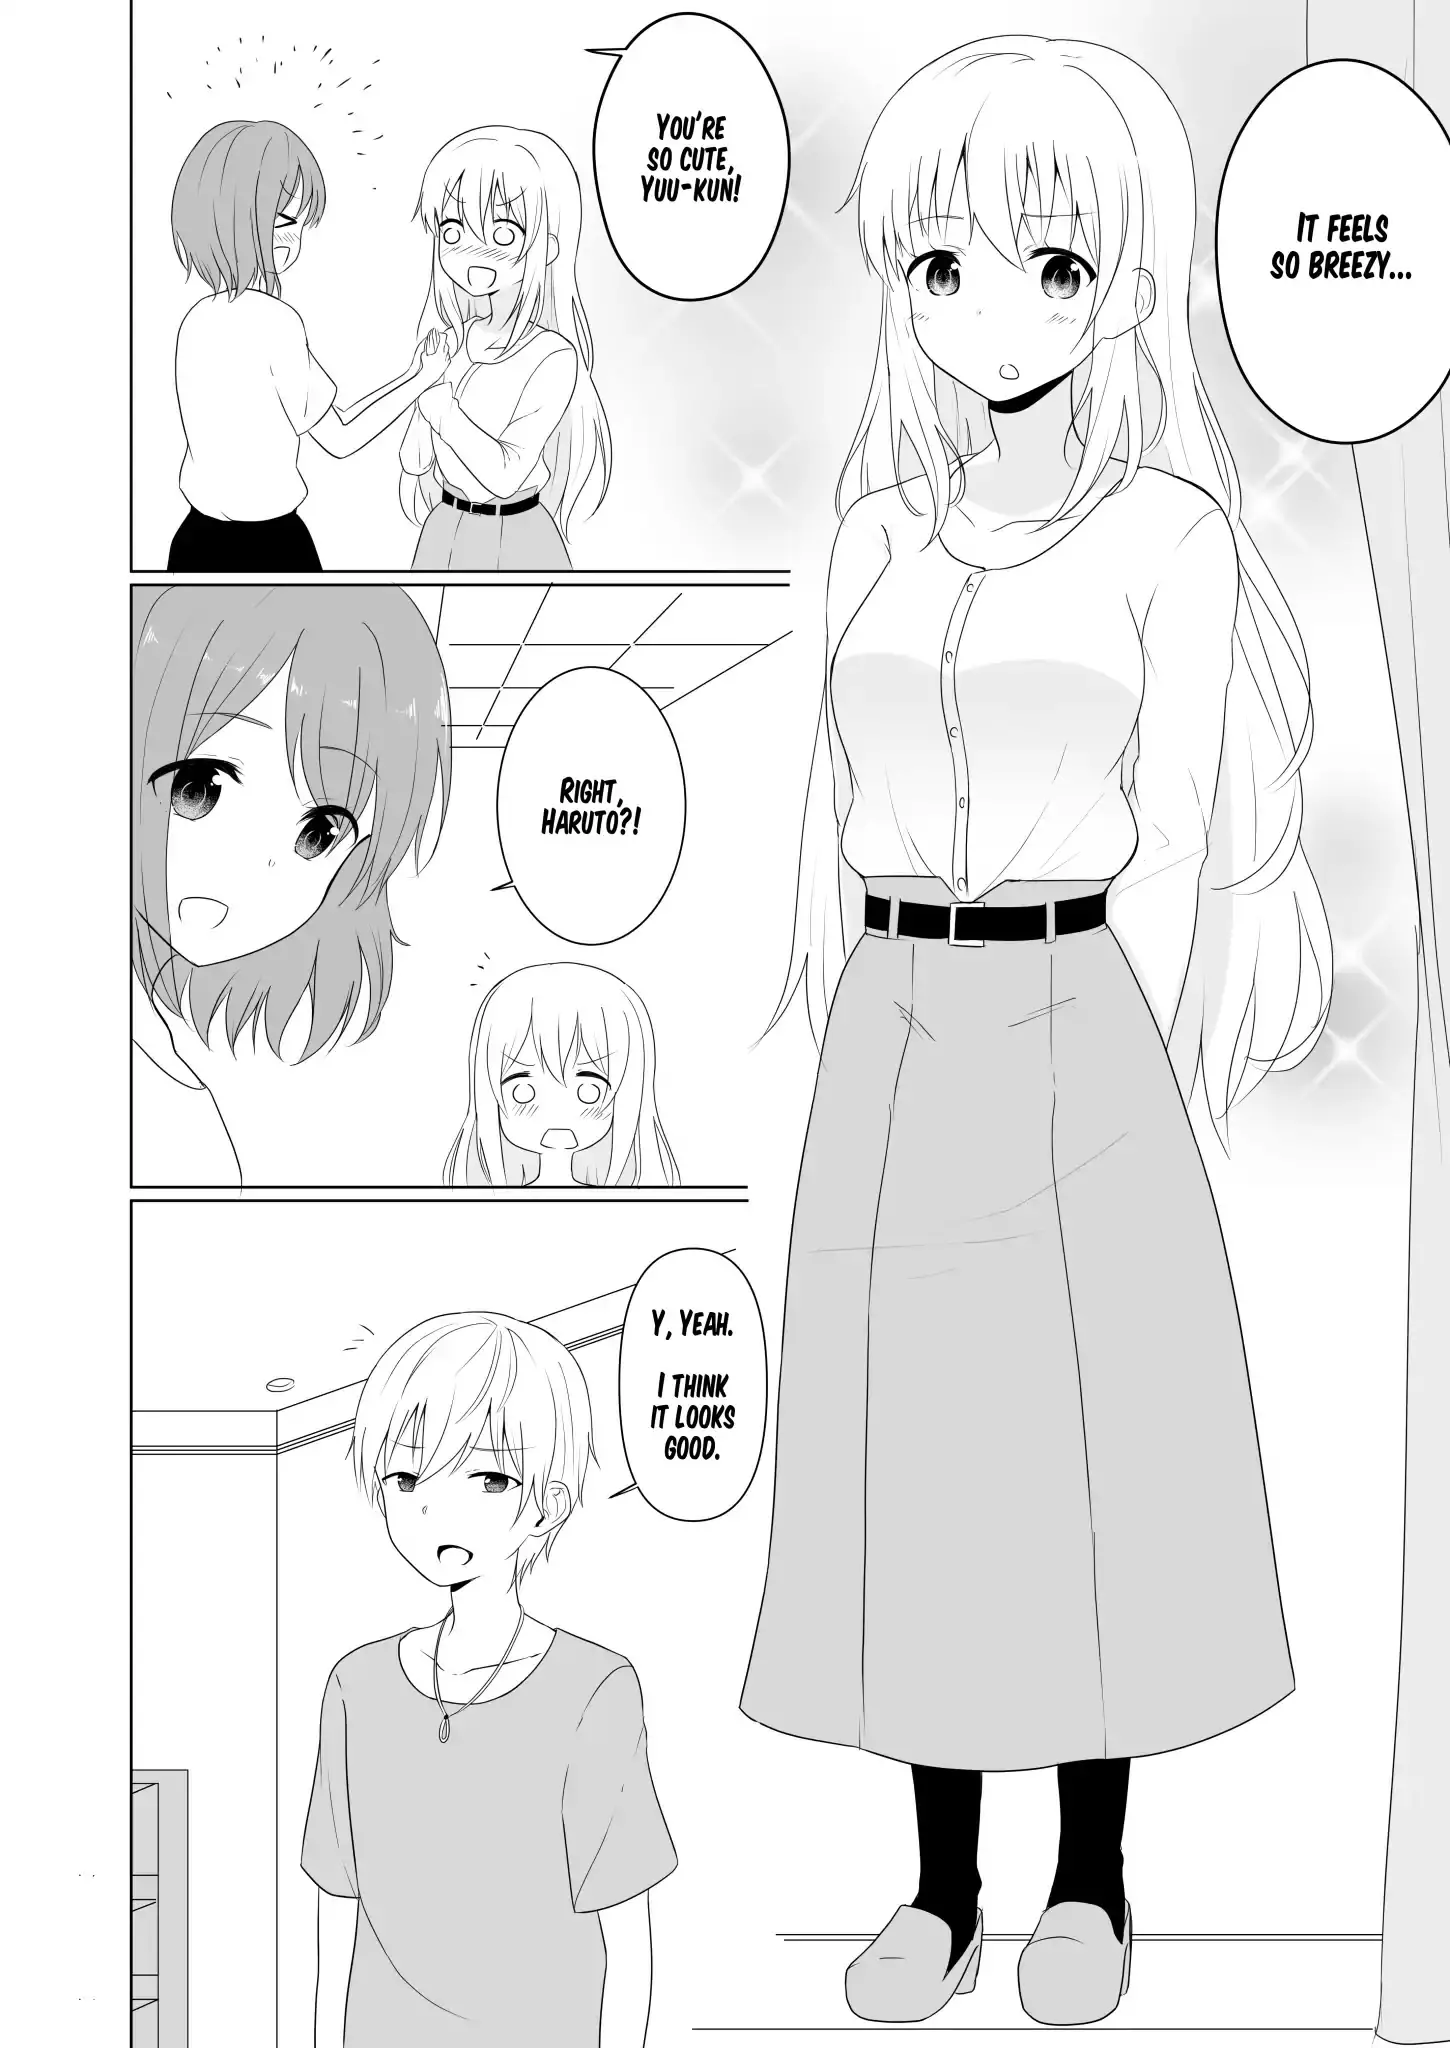 A Boy Who Loves Genderswap Got Genderswapped So He Acts Out His Ideal Genderswap Girl - 6 page 2